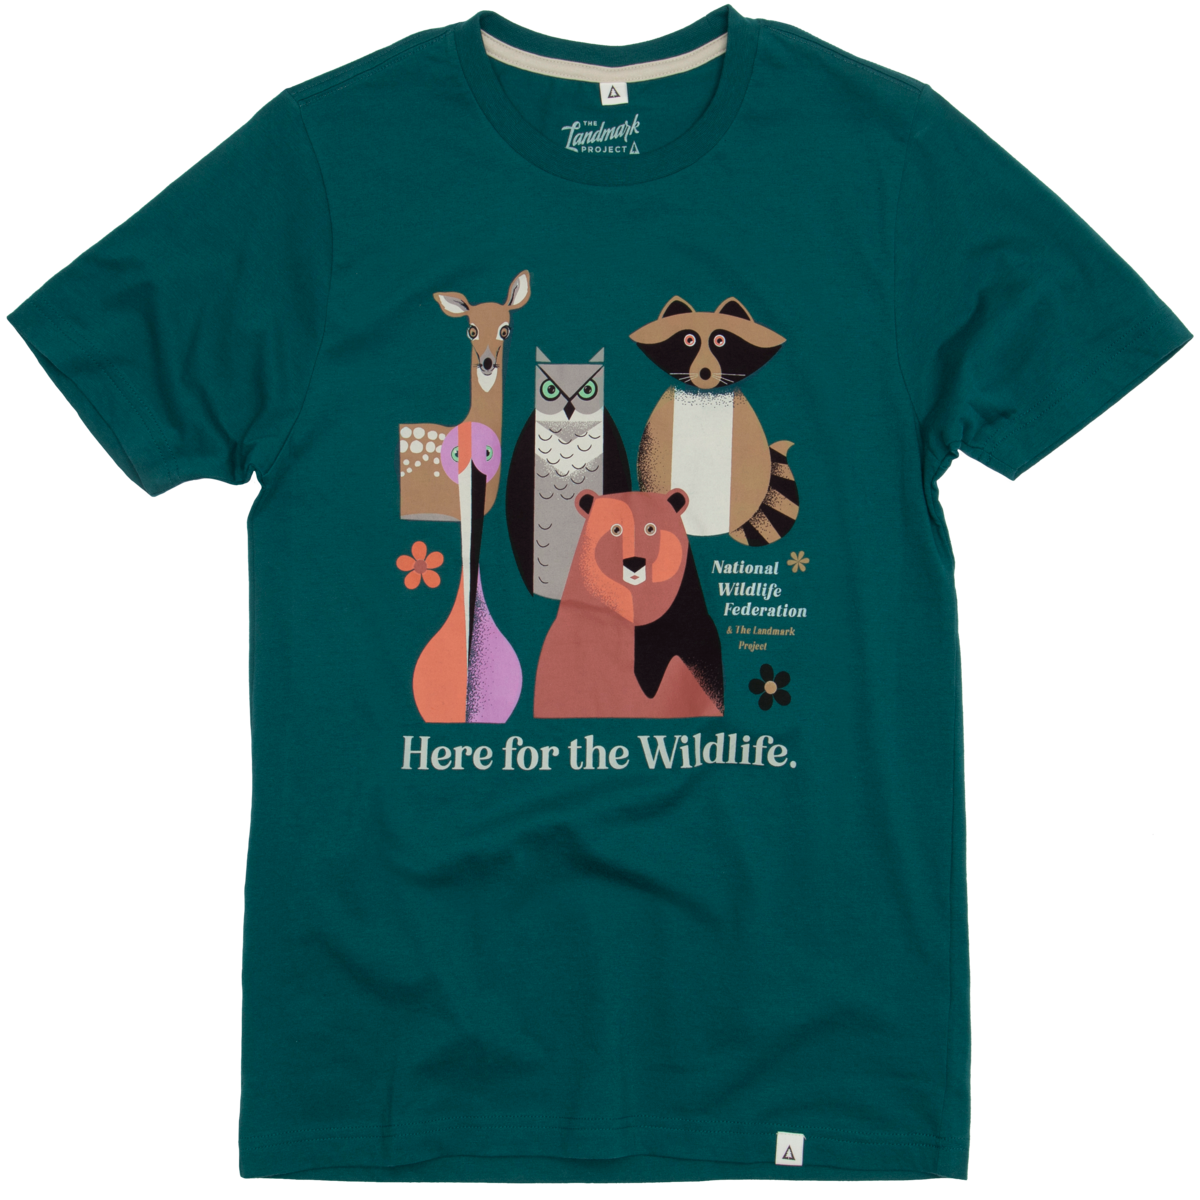 Here for the Wildlife Tee